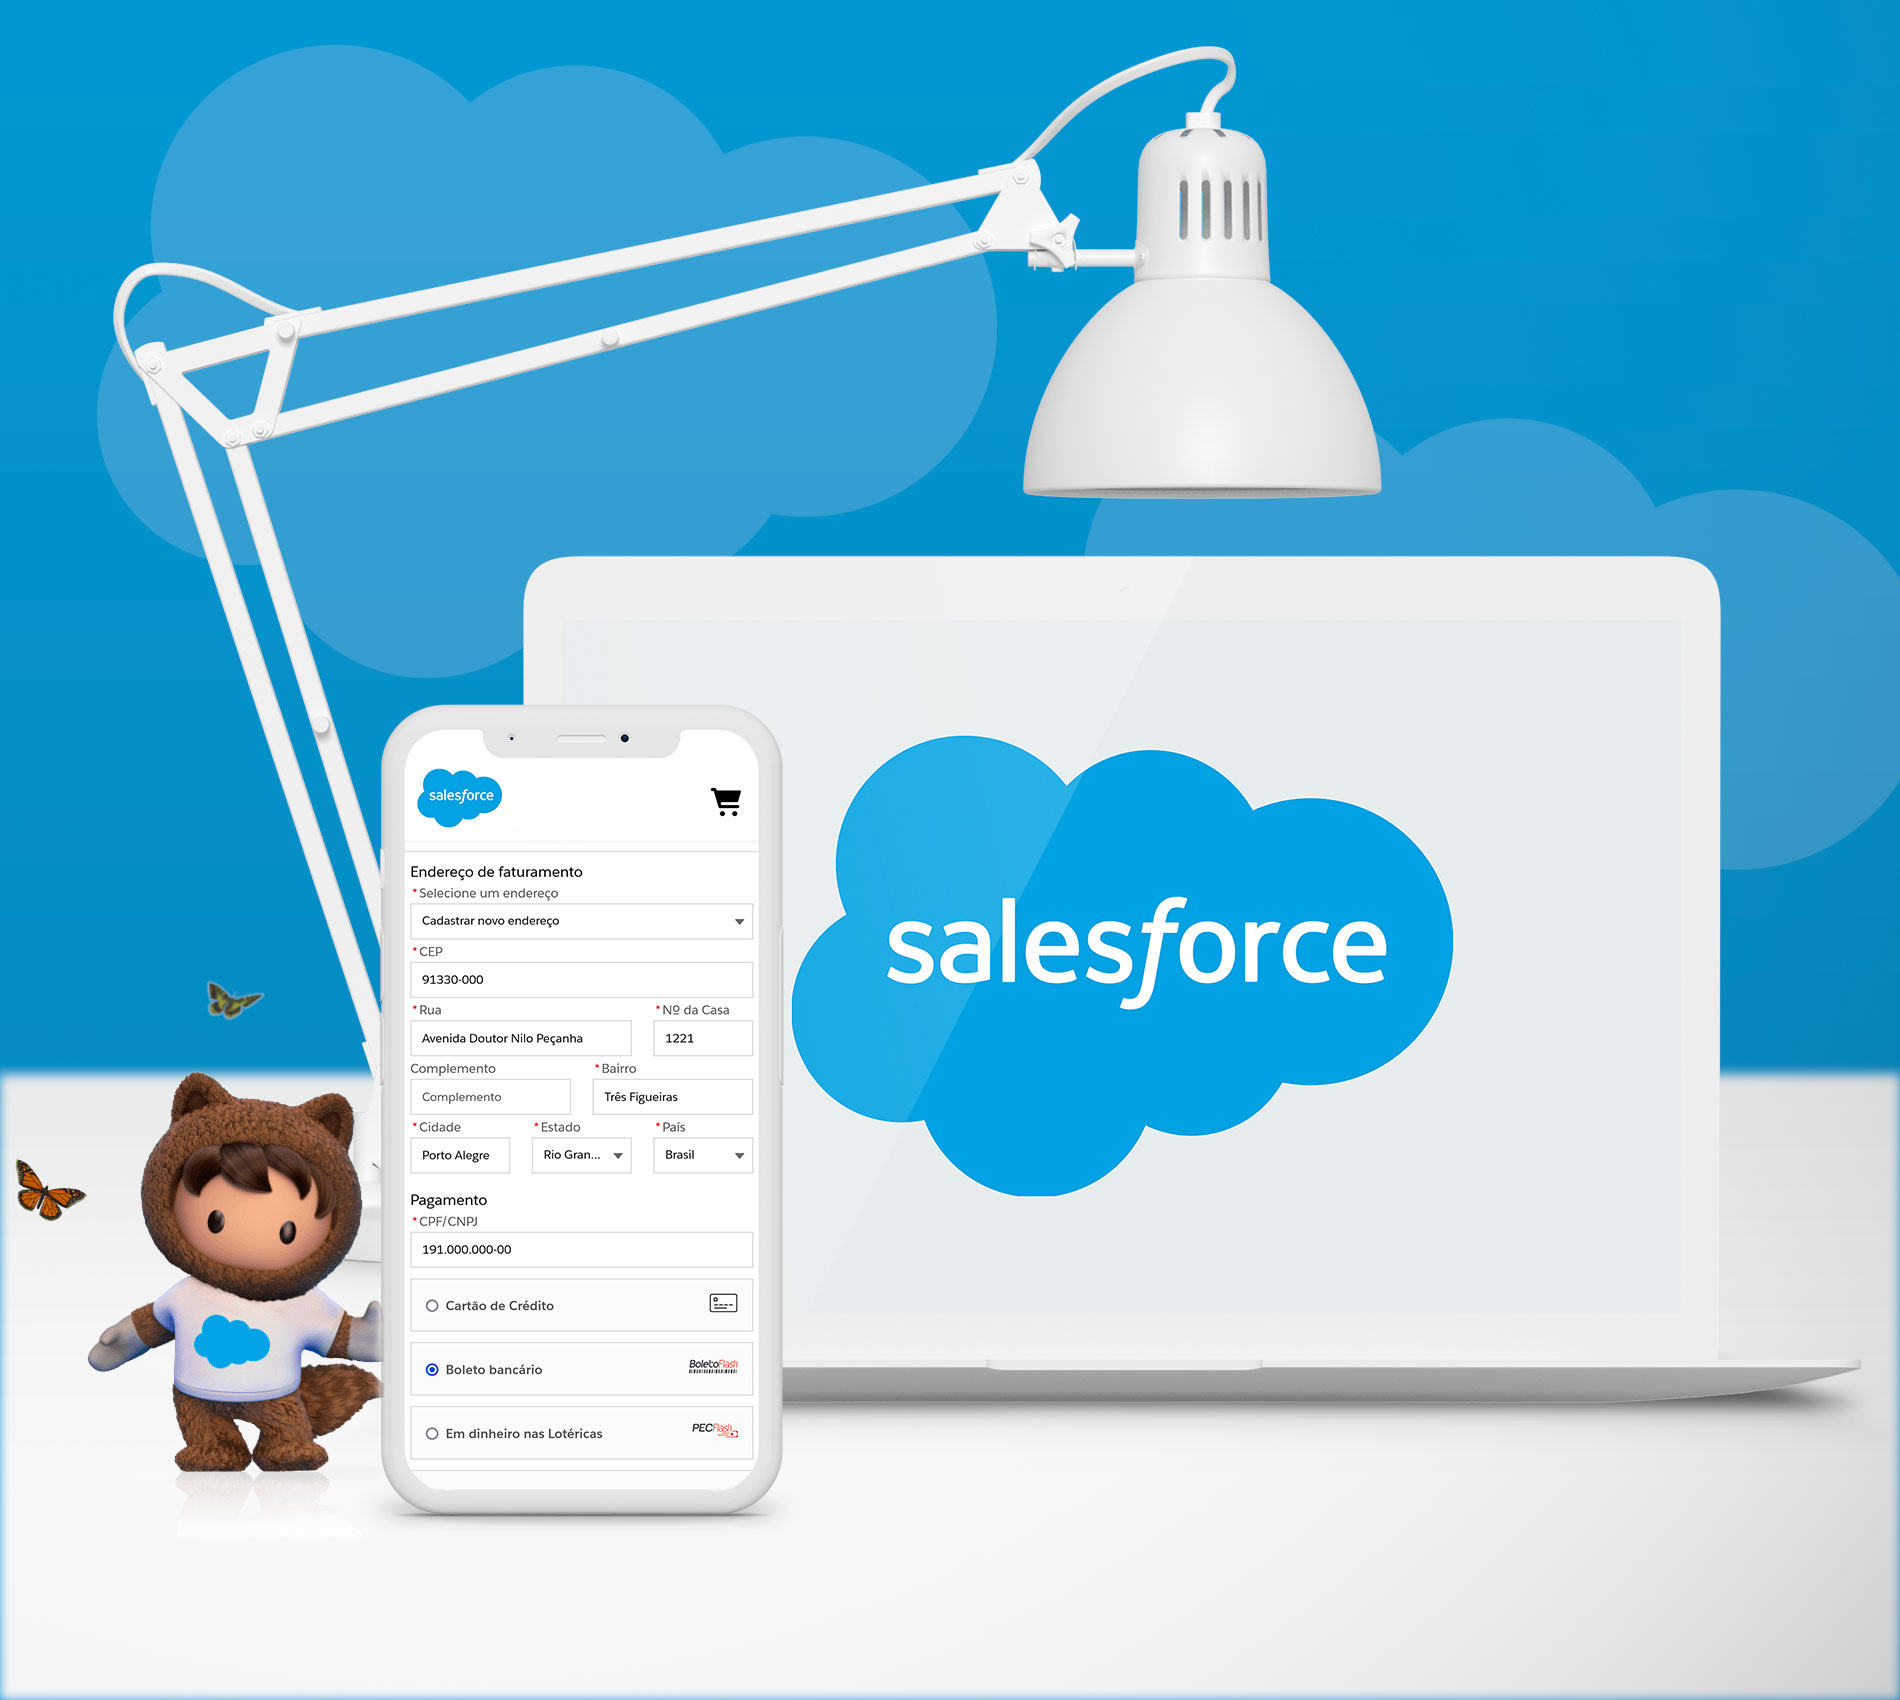 Salesforce, the World’s CRM Champion, Chooses PagBrasil for a Breakthrough Partnership